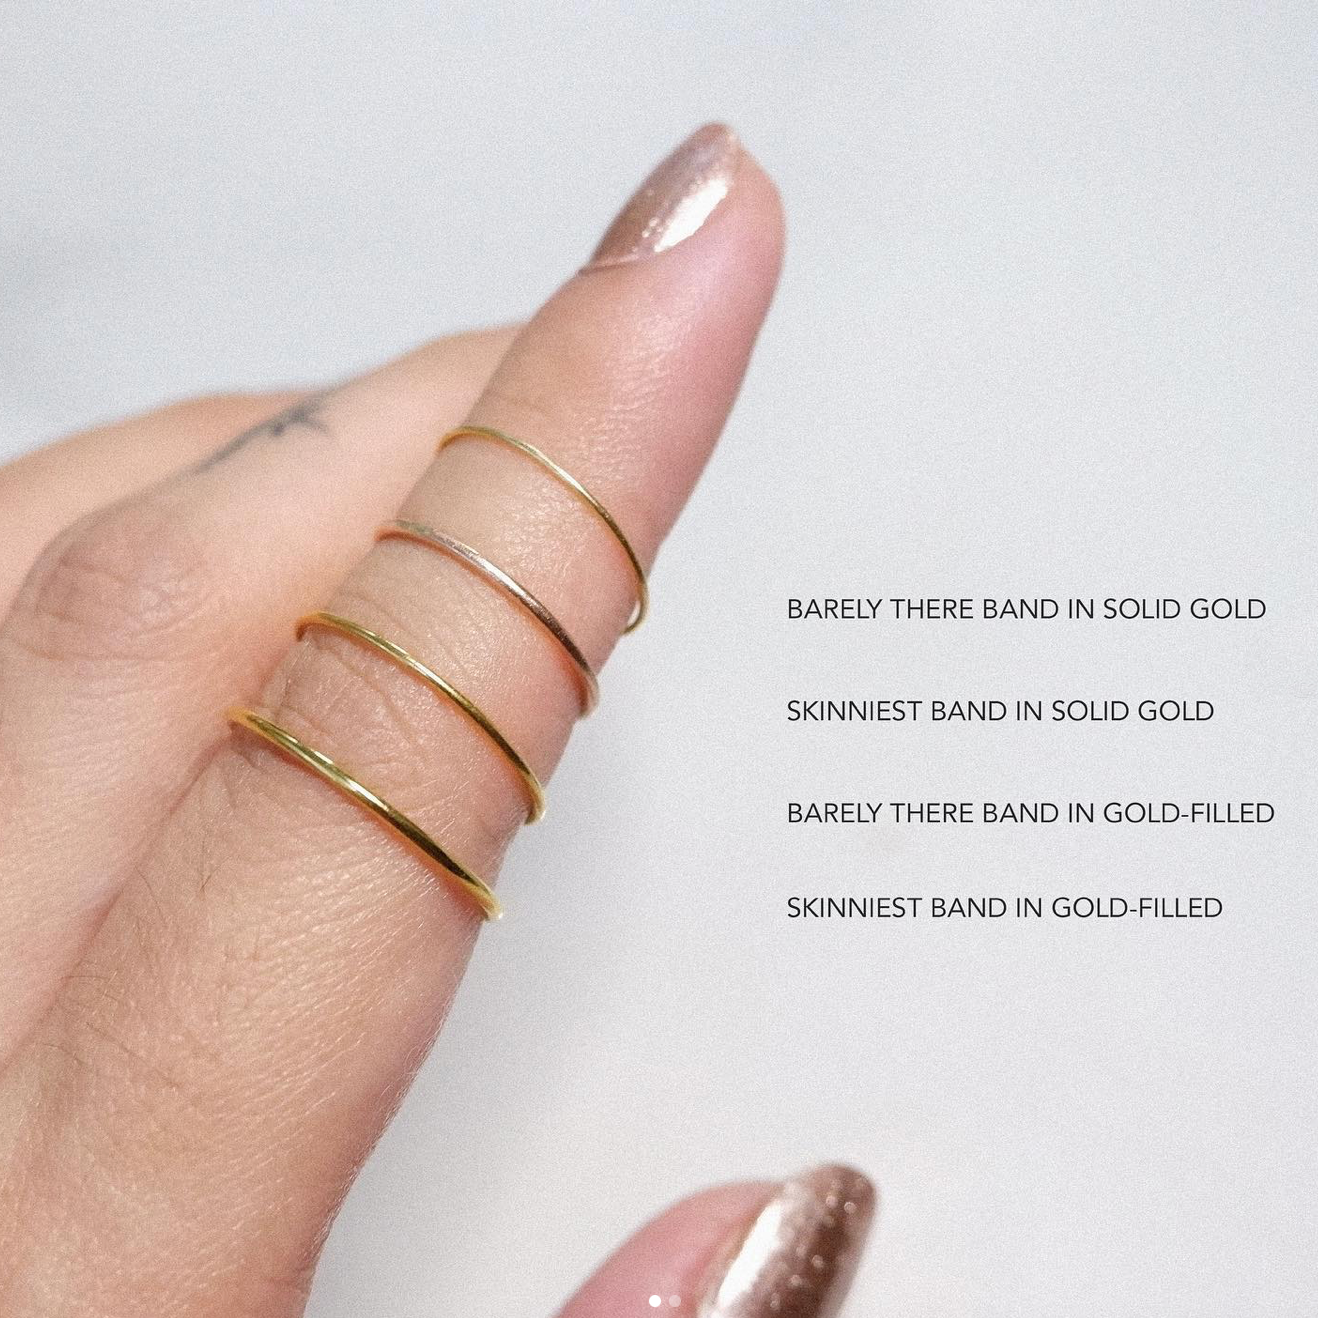 The Skinniest Band in Solid Gold